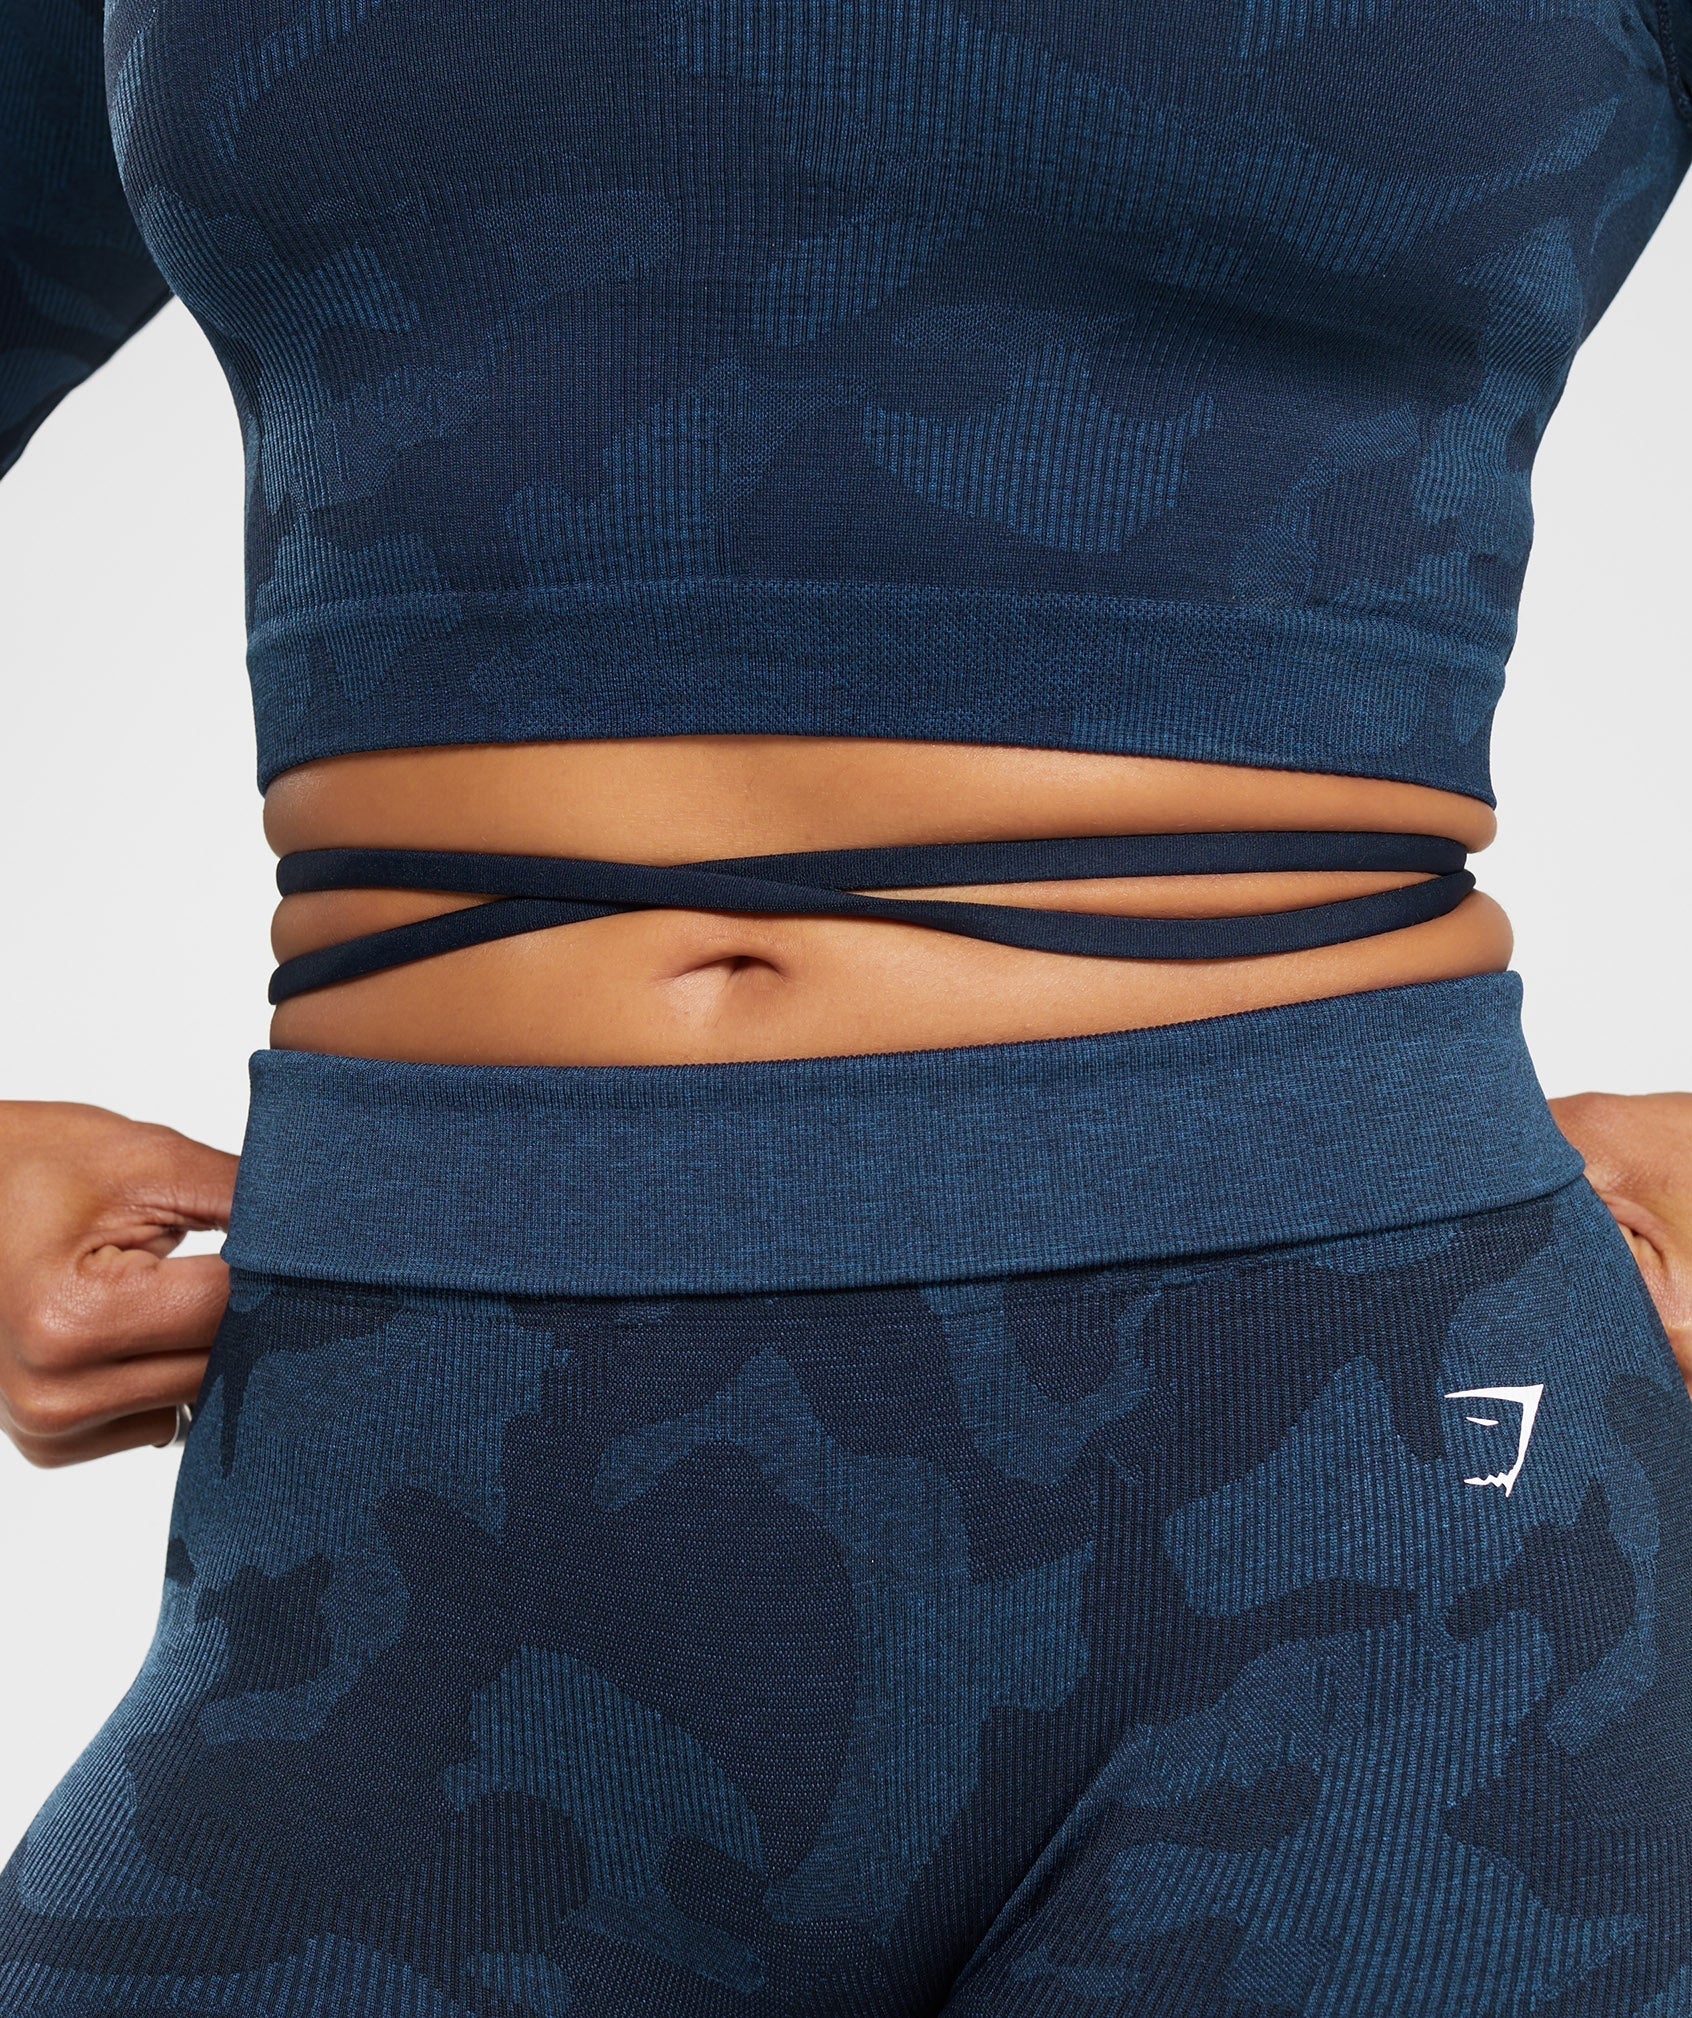 Adapt Camo Seamless Ribbed Long Sleeve Crop Top in Midnight Blue/Ash Blue - view 6